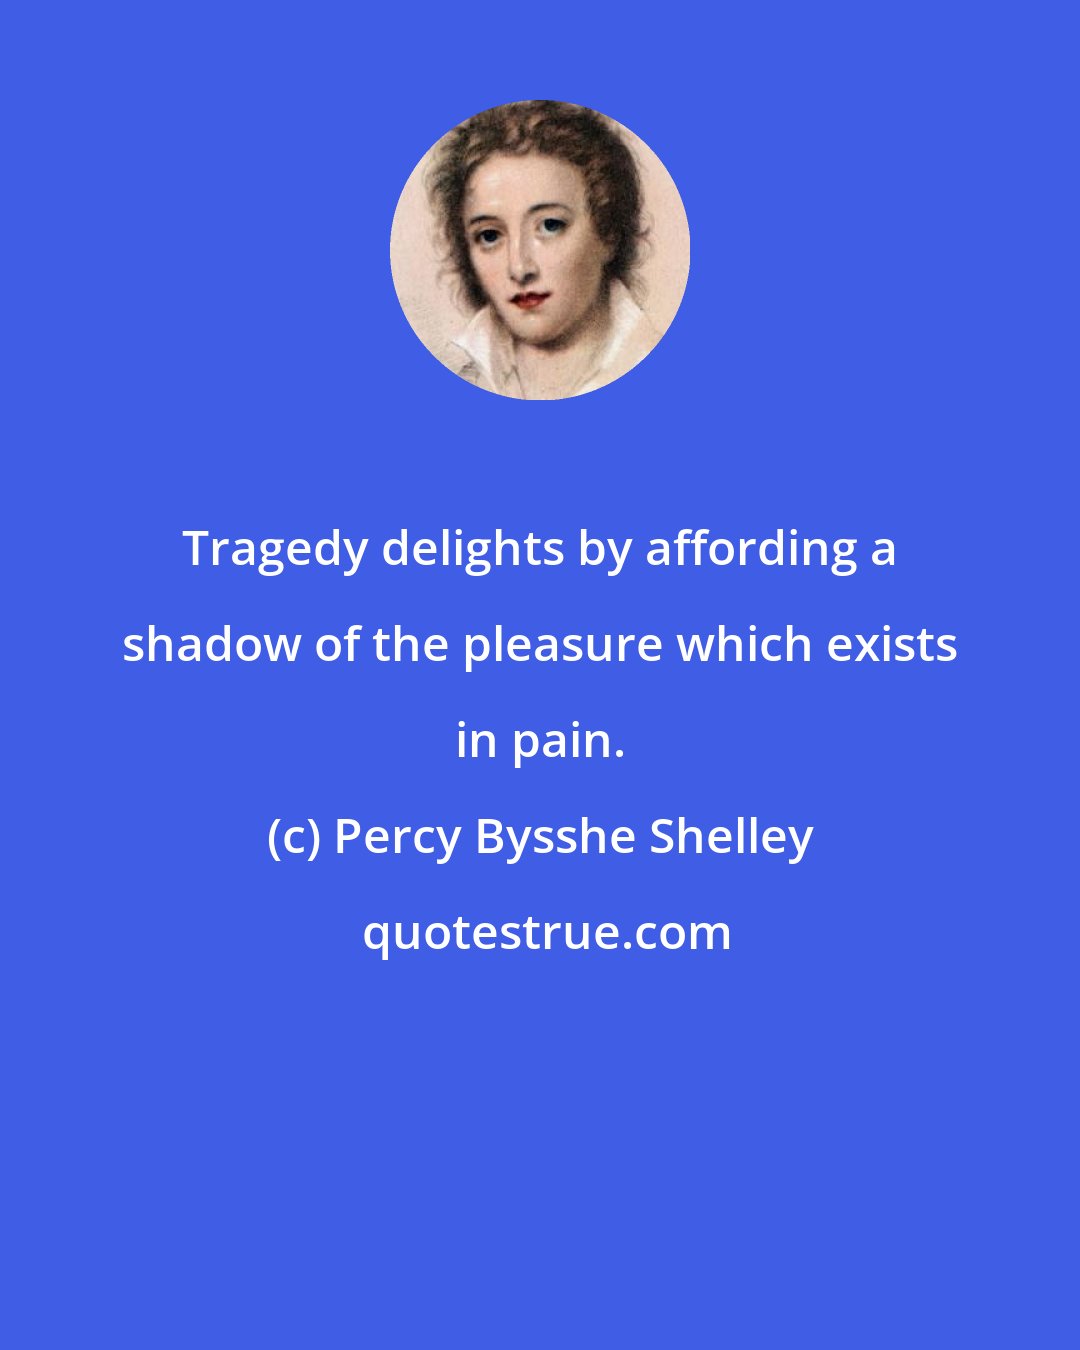 Percy Bysshe Shelley: Tragedy delights by affording a shadow of the pleasure which exists in pain.